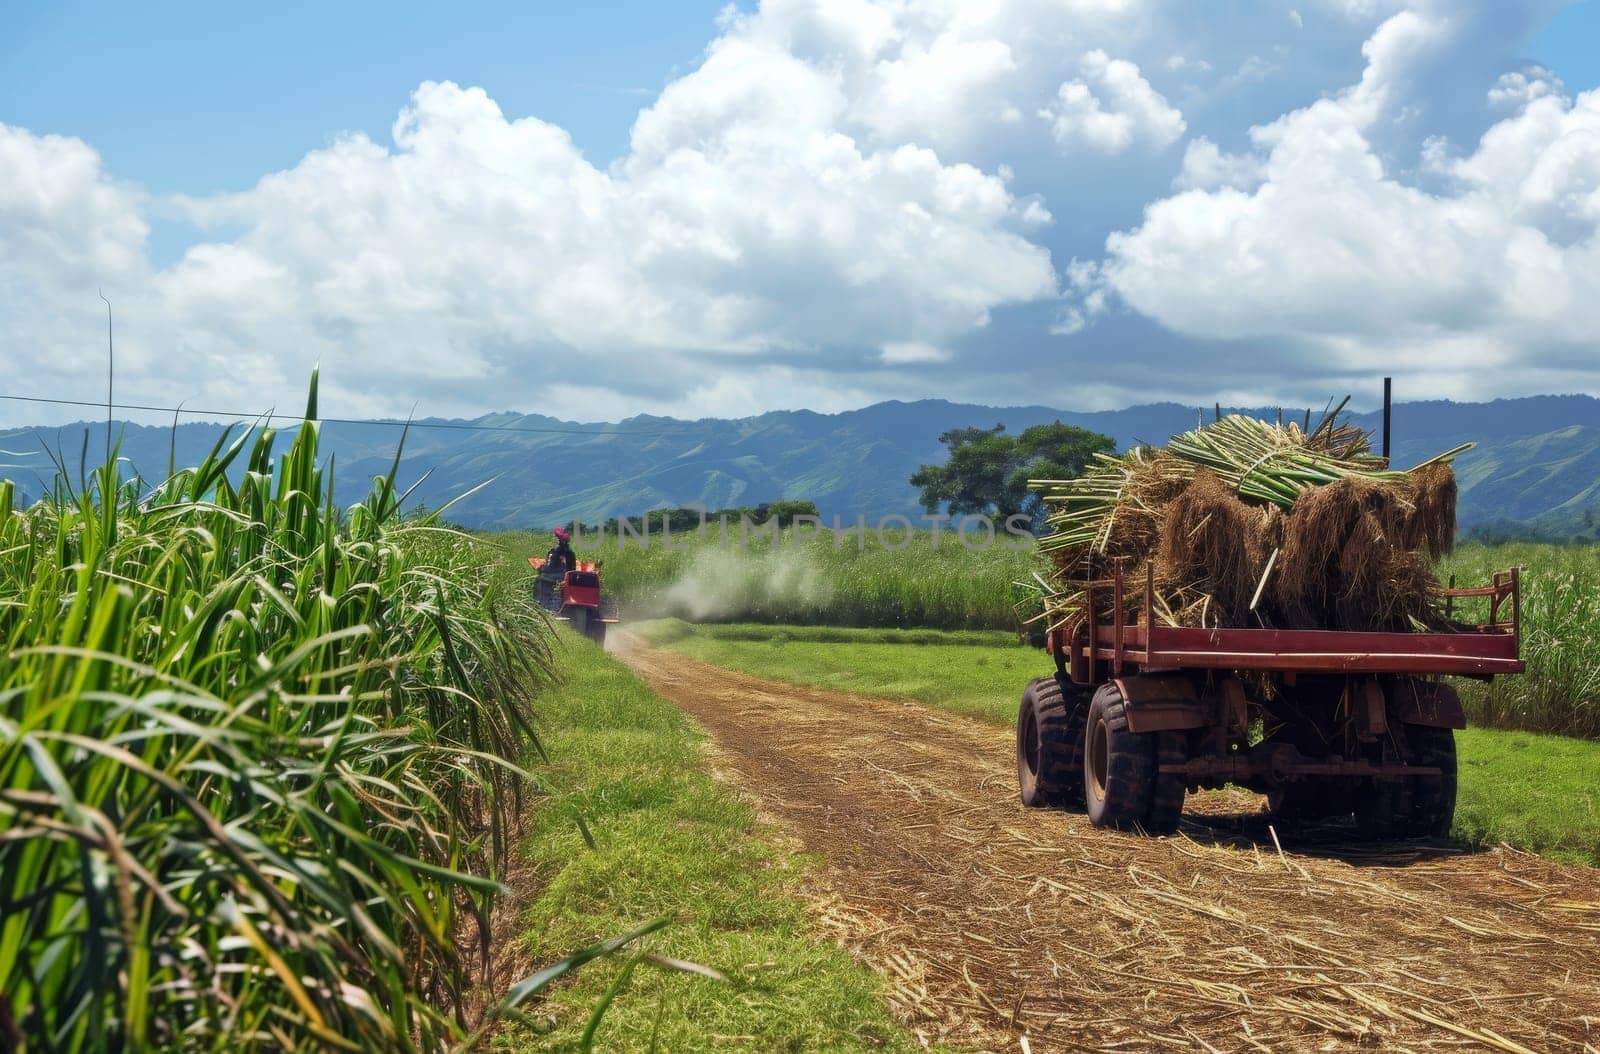 A tractor hauling a load of freshly cut sugar cane traverses a dirt road amidst lush fields, with mountain ranges stretching in the distance under a cloud-dappled sky